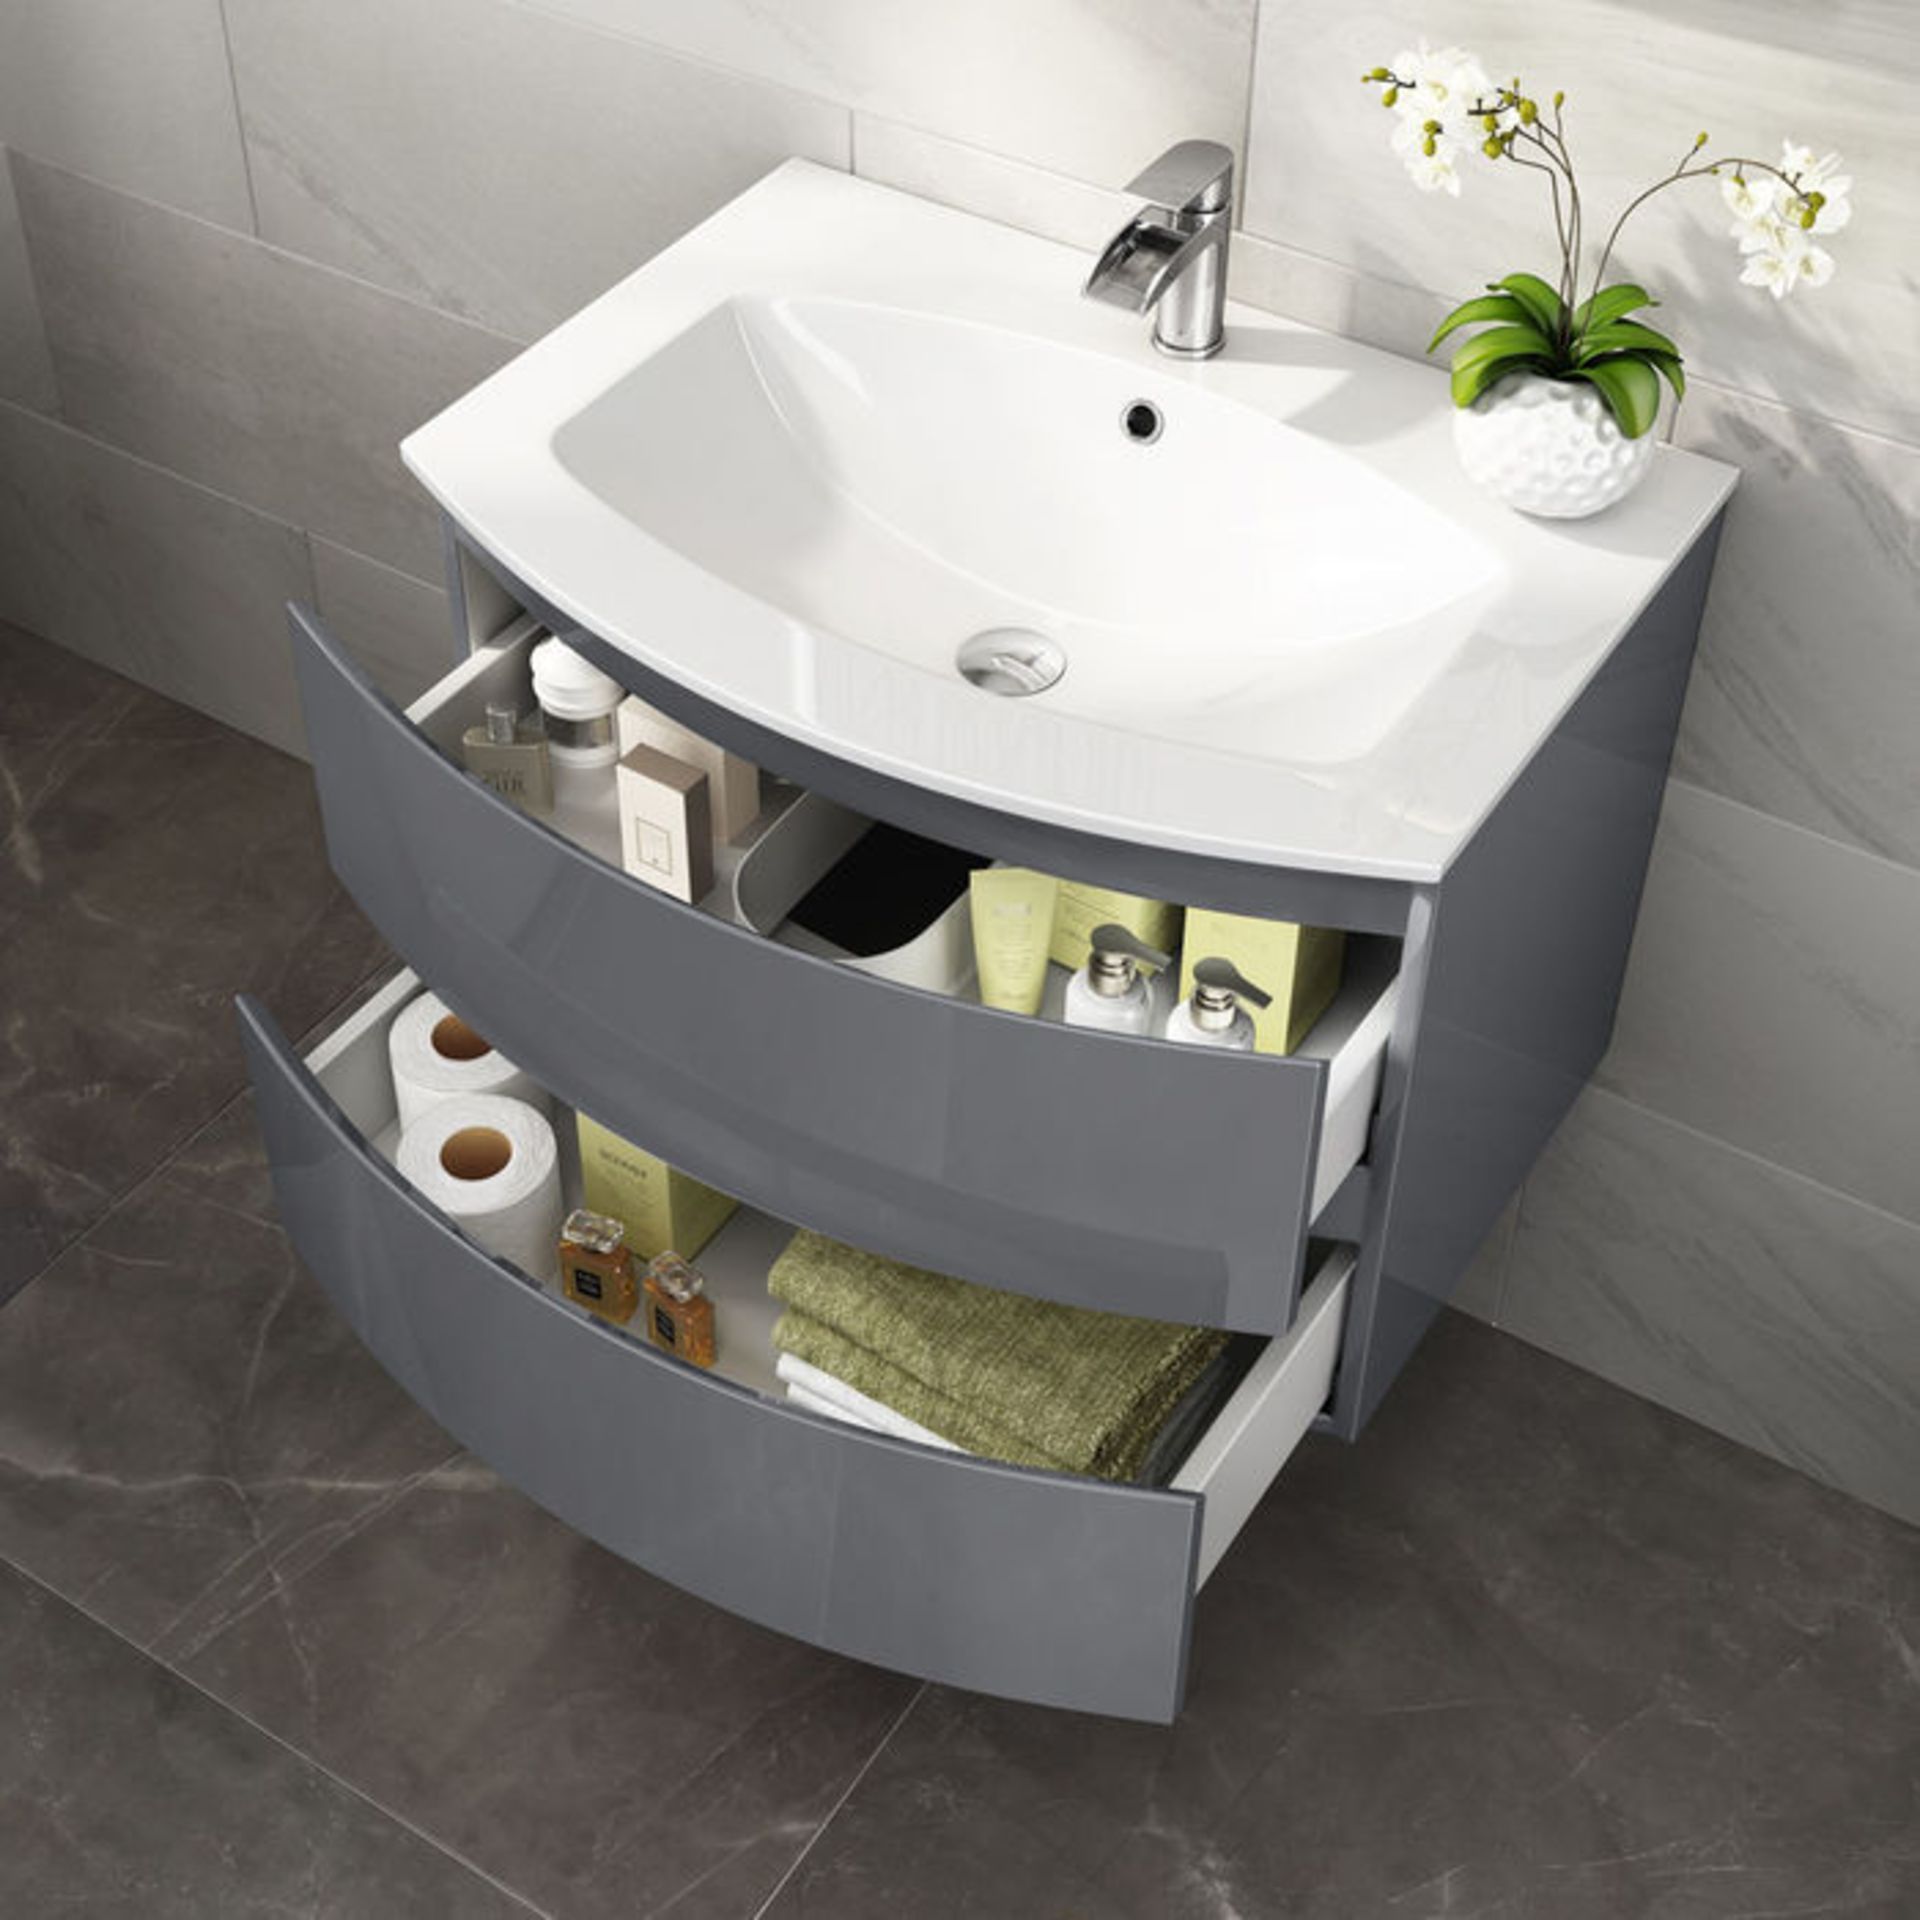 NEW & BOXED 700mm Amelie Gloss Grey Curved Vanity Unit - Wall Hung. RRP £999.99.Comes complet... - Image 2 of 3